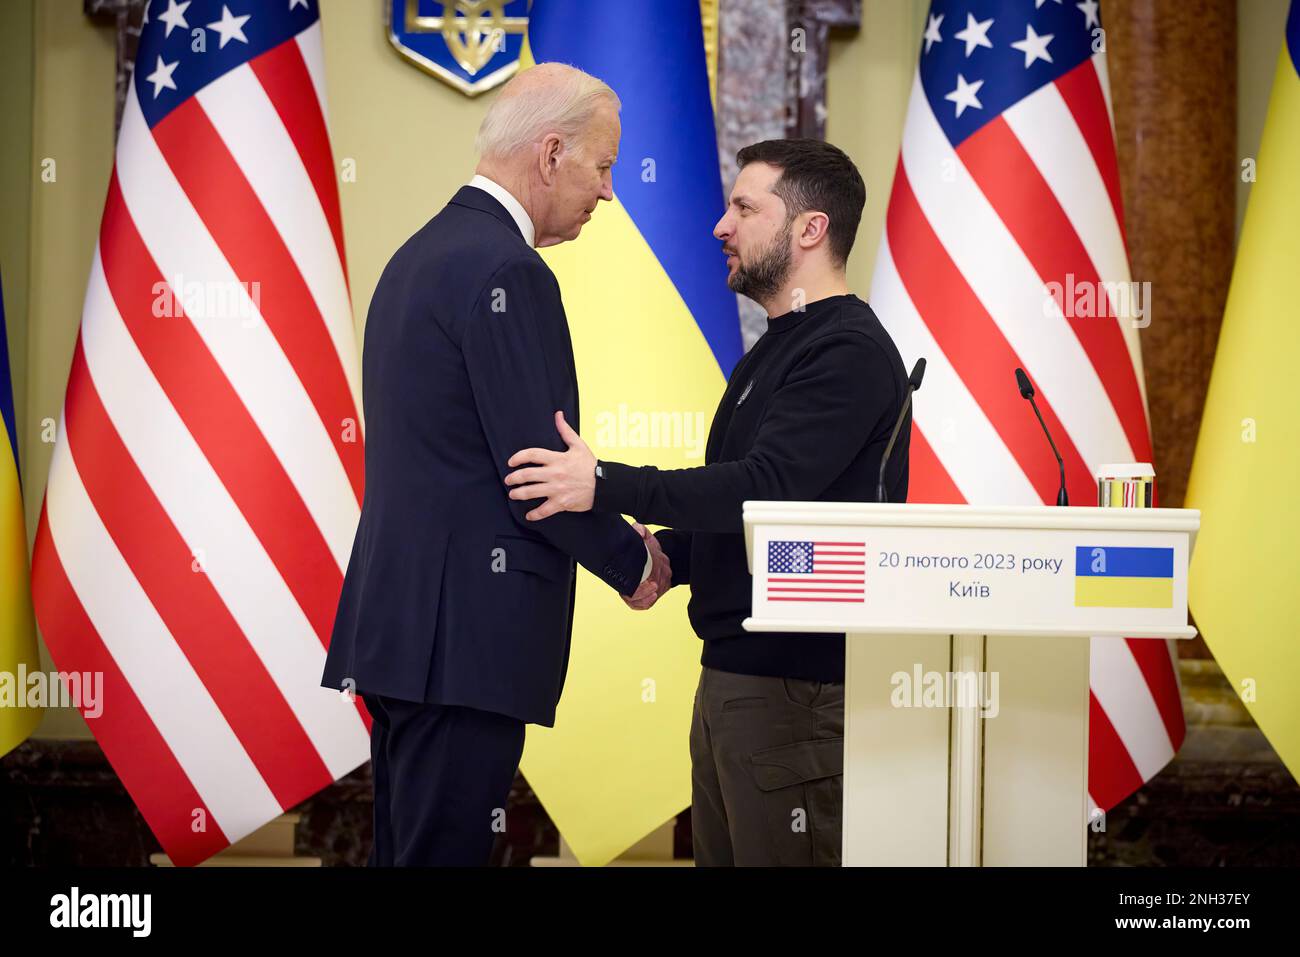 KYIV, UKRAINE - February 20, 2023 -U.S. President JOE BIDEN made a 10 hour long train ride from Poland to the Ukraine capitol of Kyiv where he met with Ukraine President VOLODYMYR ZELENSKY. Biden’s “under the radar” visit was to reaffirm the United States commitment for the Ukraine war effort and eventual peace in the region. In Kyiv, President Biden announced a new delivery of critical equipment for Ukraine. This package includes artillery ammunition, anti-armor systems, and air surveillance radars to help protect the Ukrainian people from aerial bombardments. Photo: Ukraine Presidents Office Stock Photo